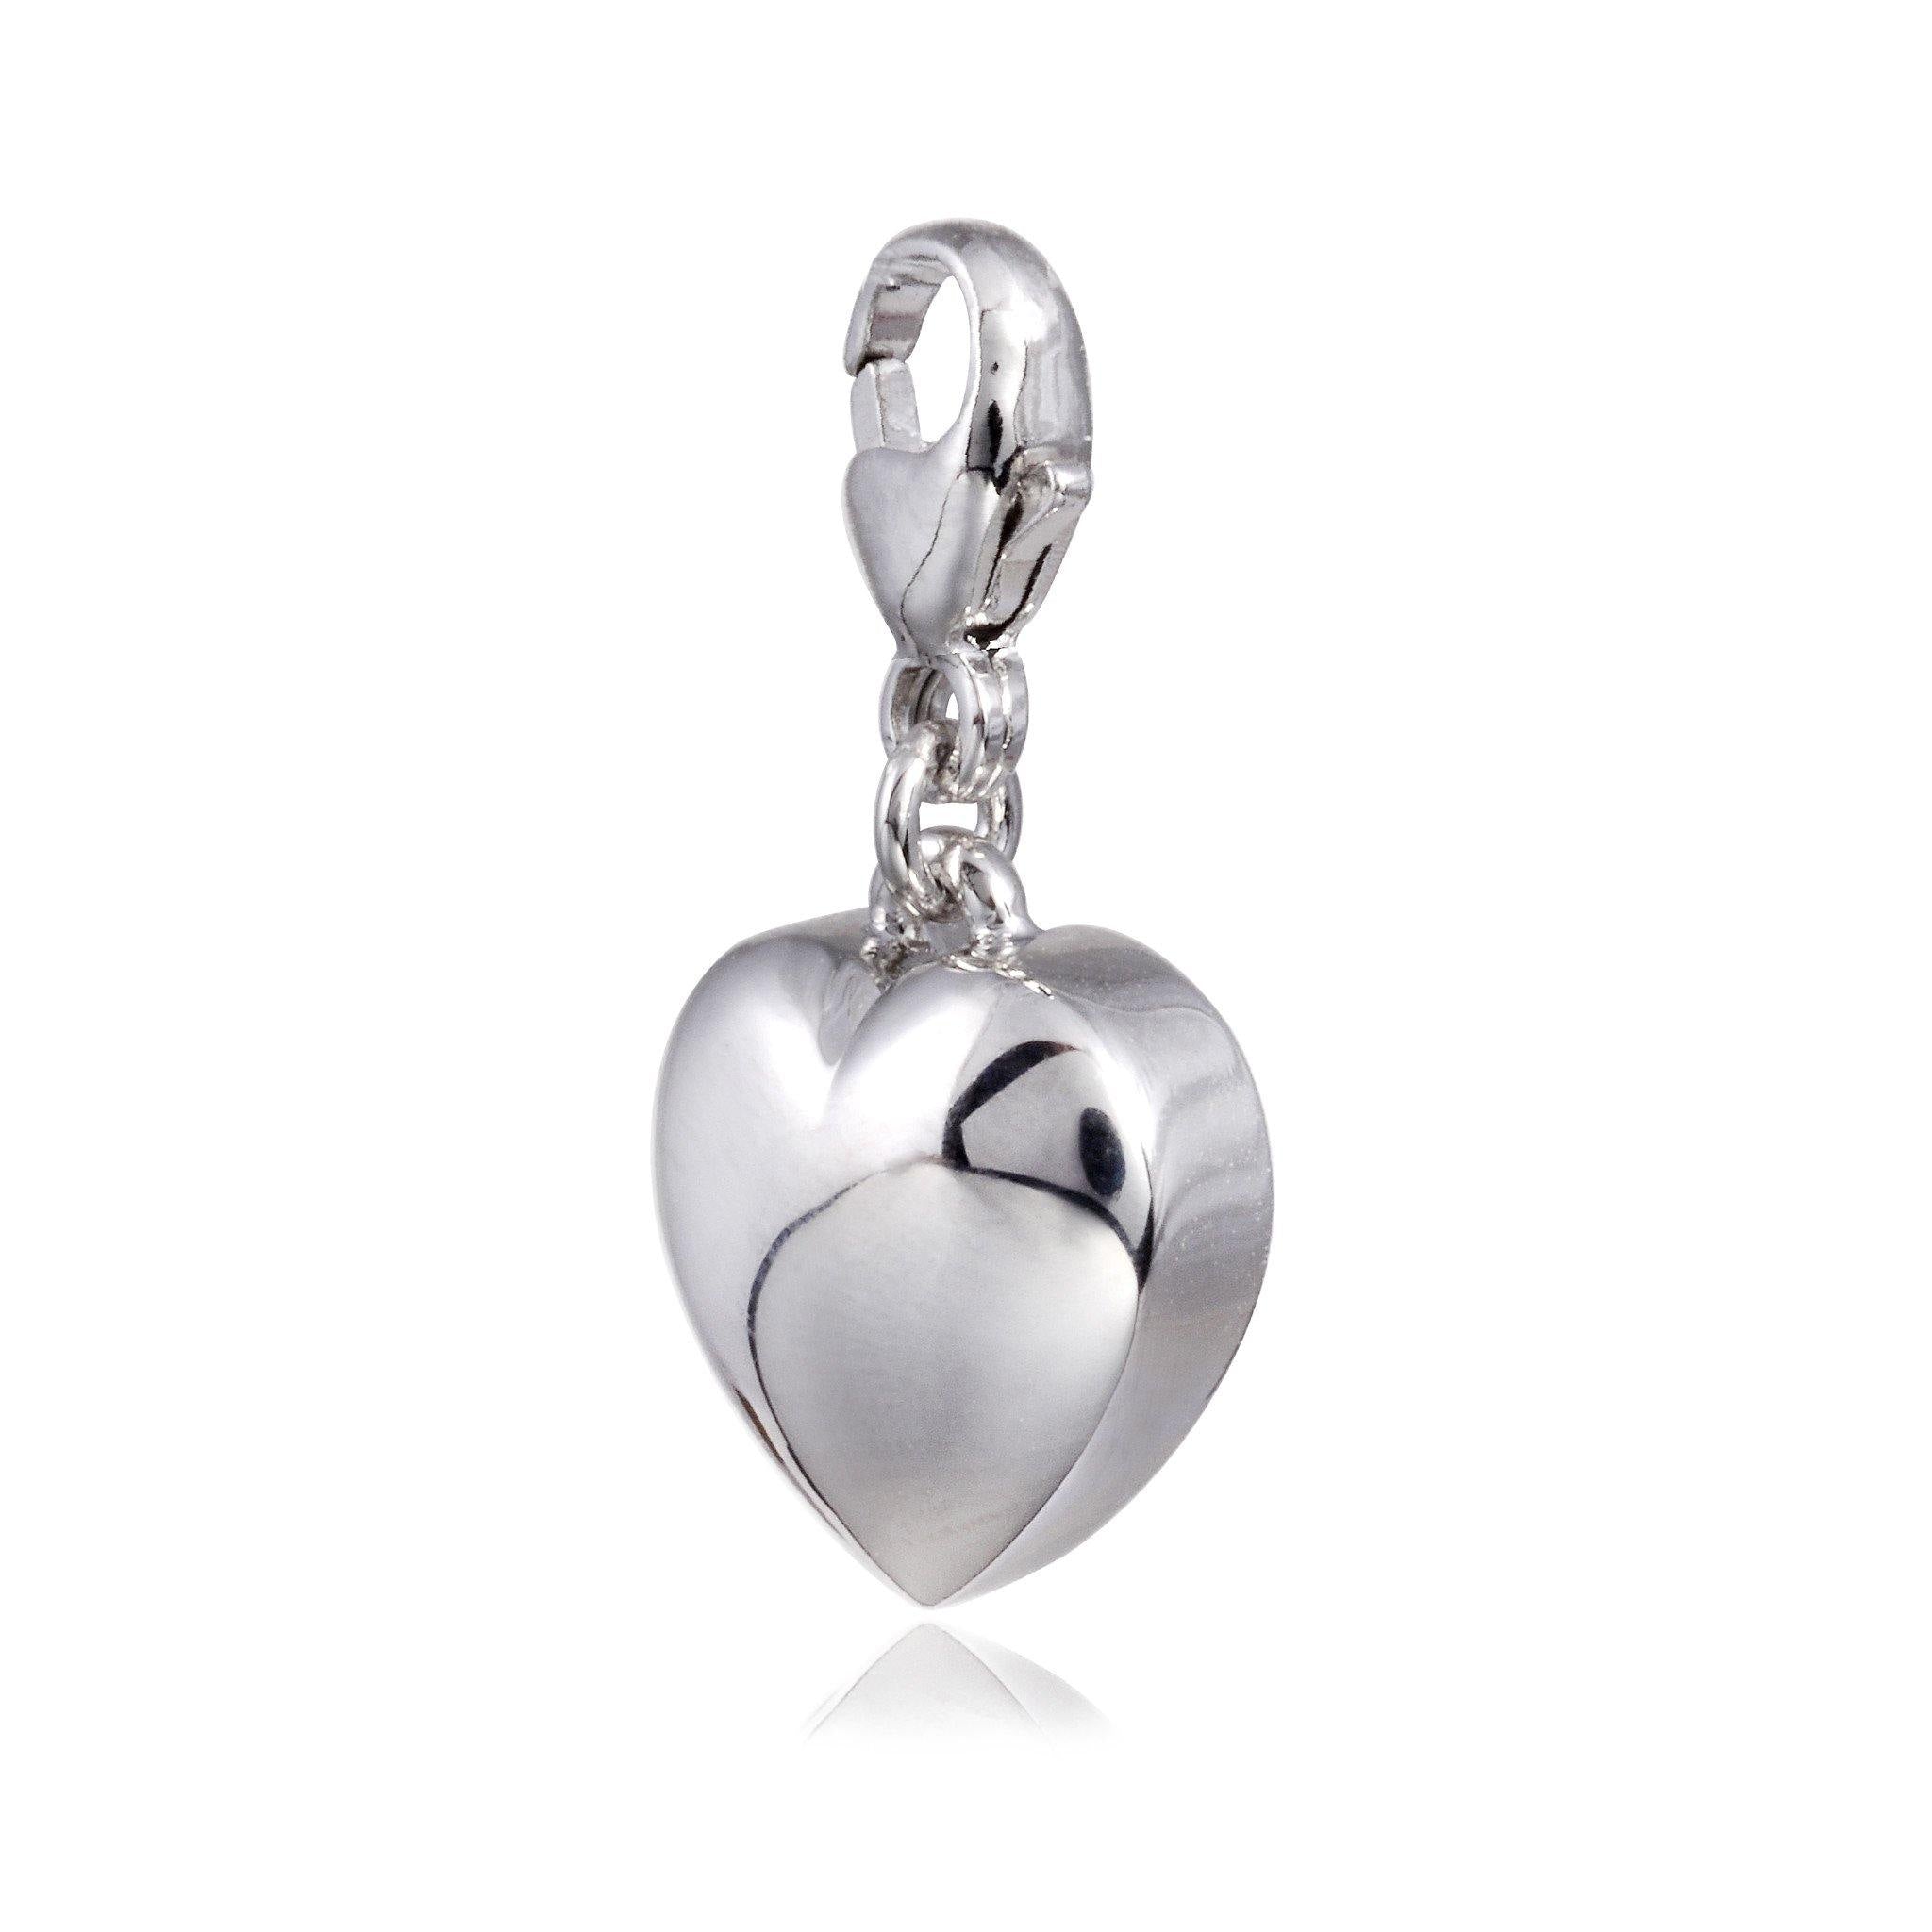 Belgravia Design 5a Cremation Ashes Charm 925 Silver RKS